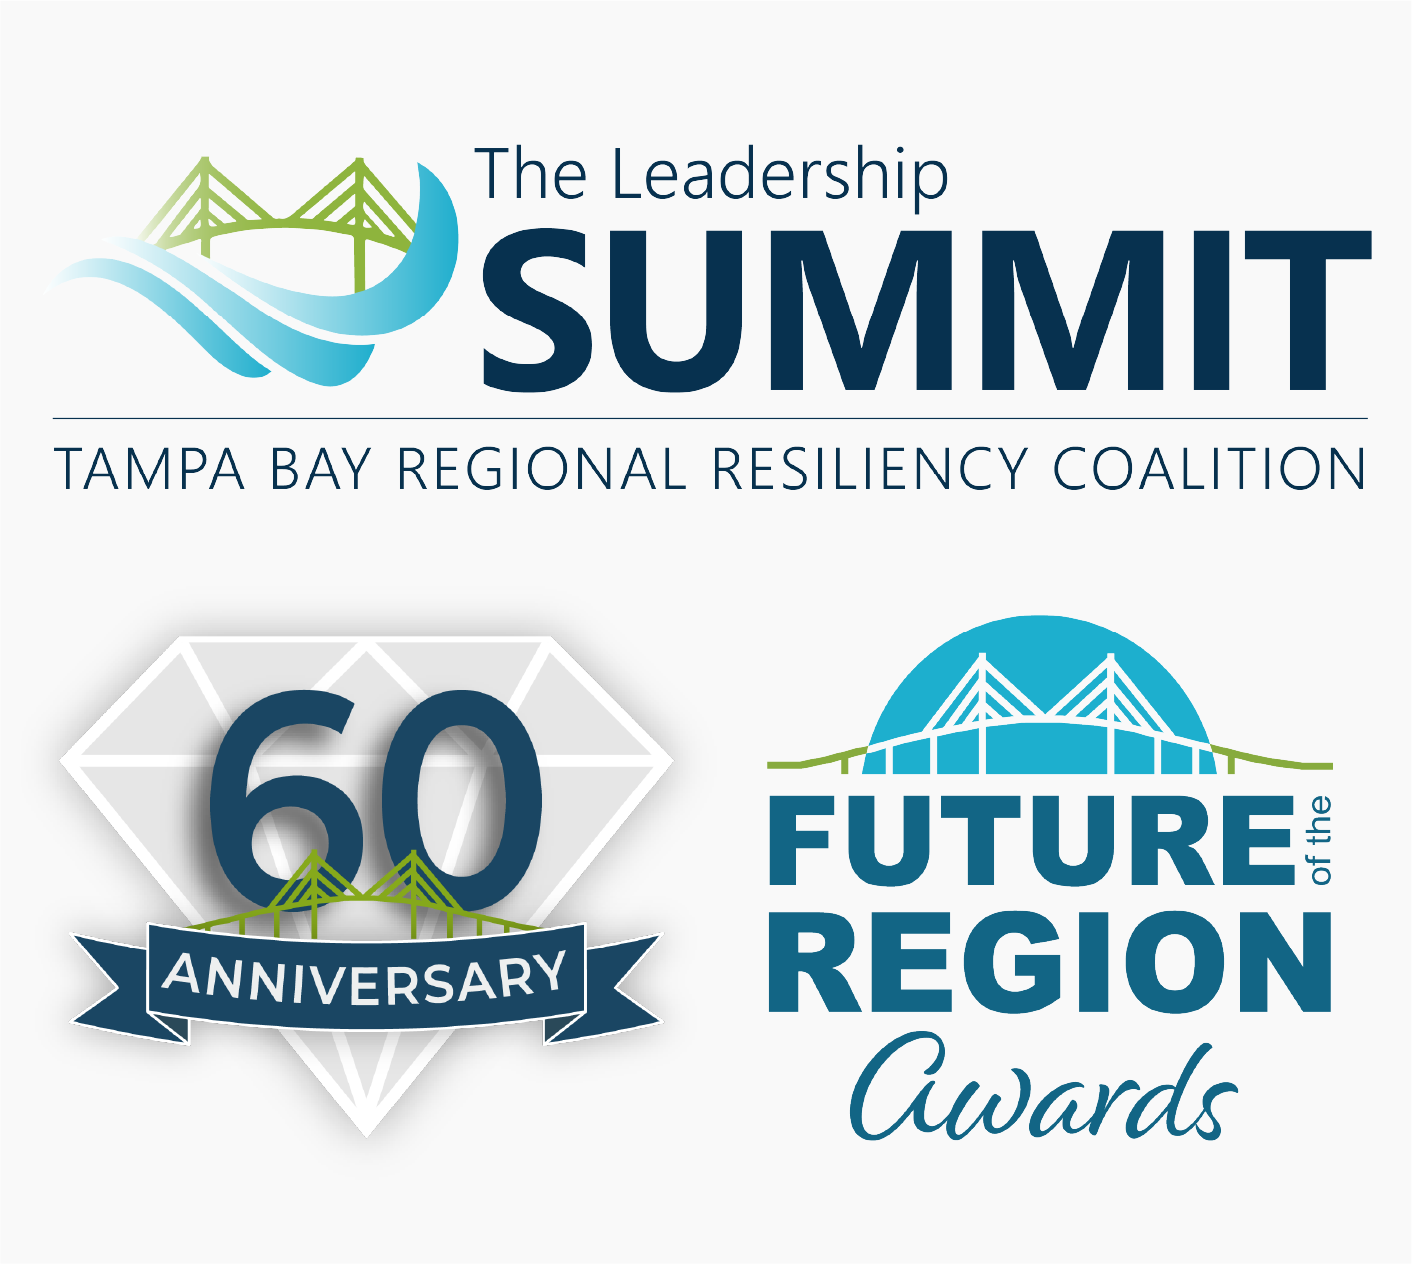 The Leadership Summit will feature four area mayors in panel discussion